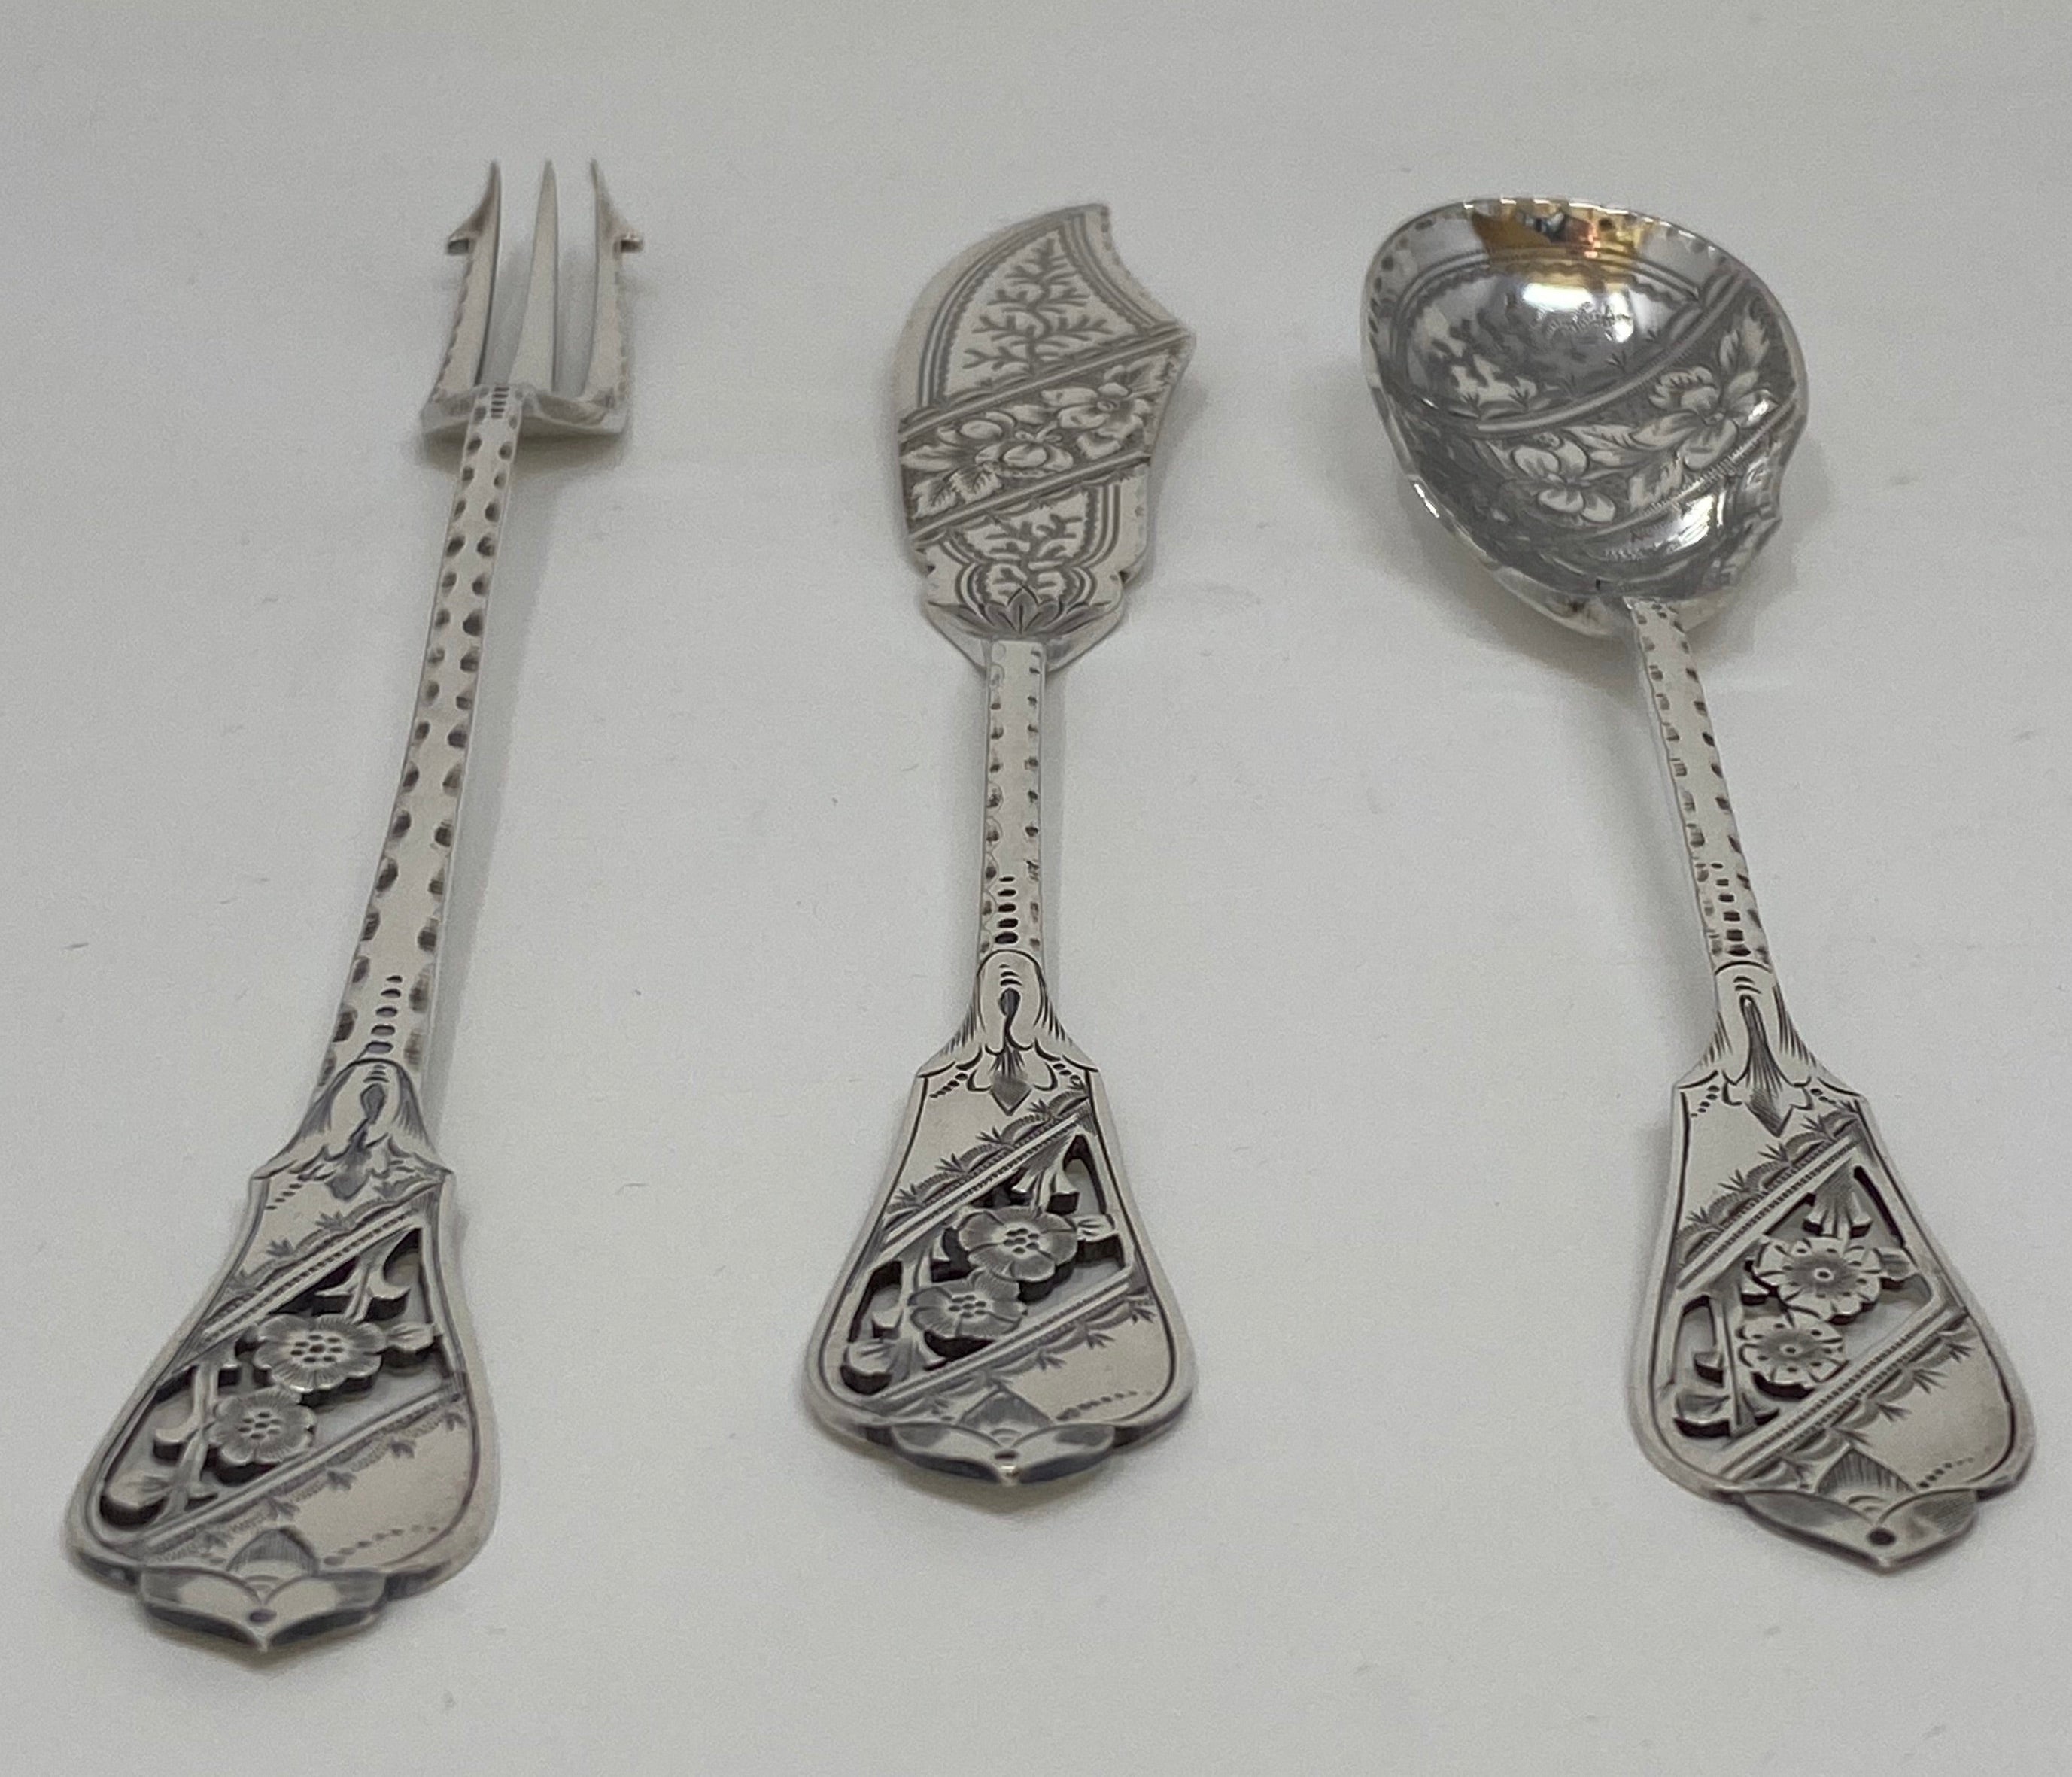 Antique Silver Plated Canape Set